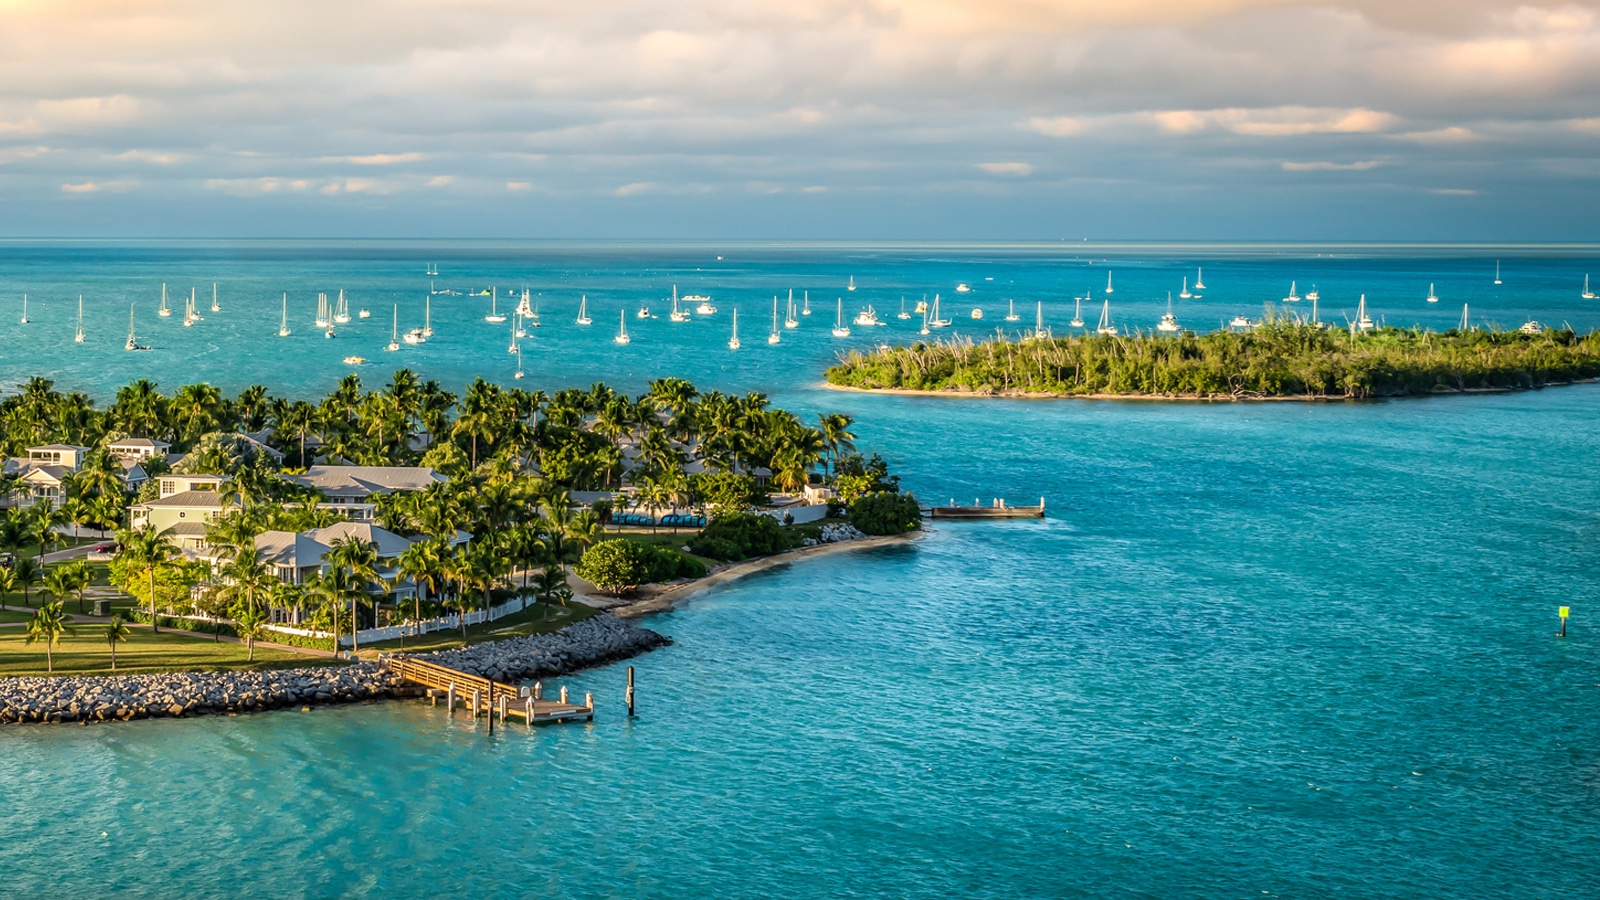 Bird's Eye View Of Sunset Key And Wisteria Island From Key West, Florida